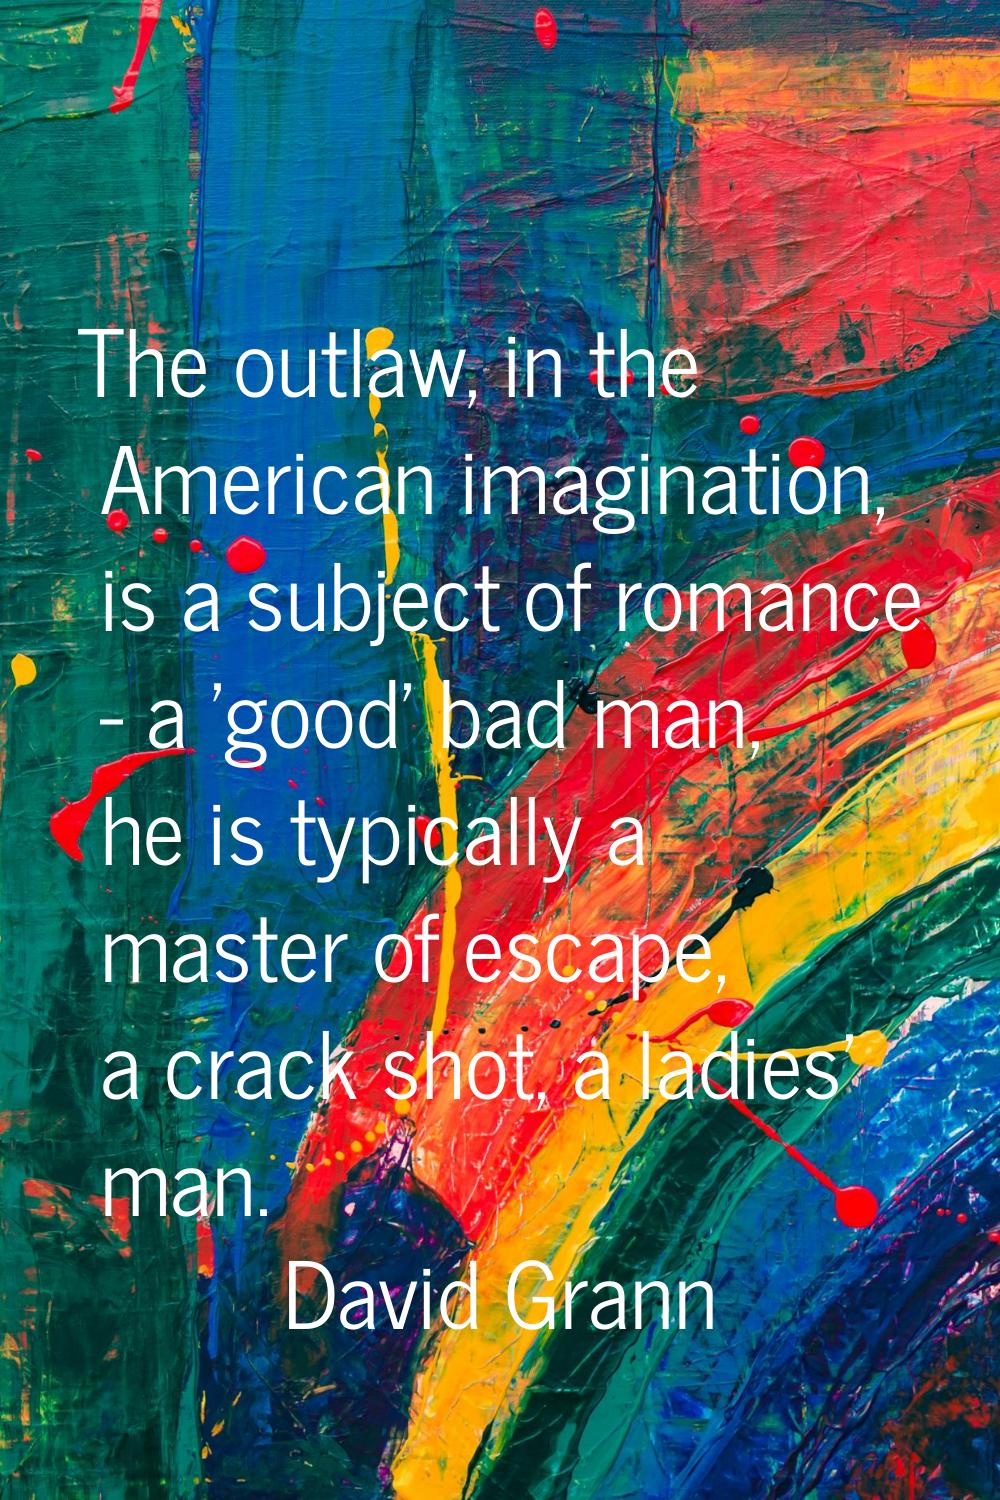 The outlaw, in the American imagination, is a subject of romance - a 'good' bad man, he is typicall